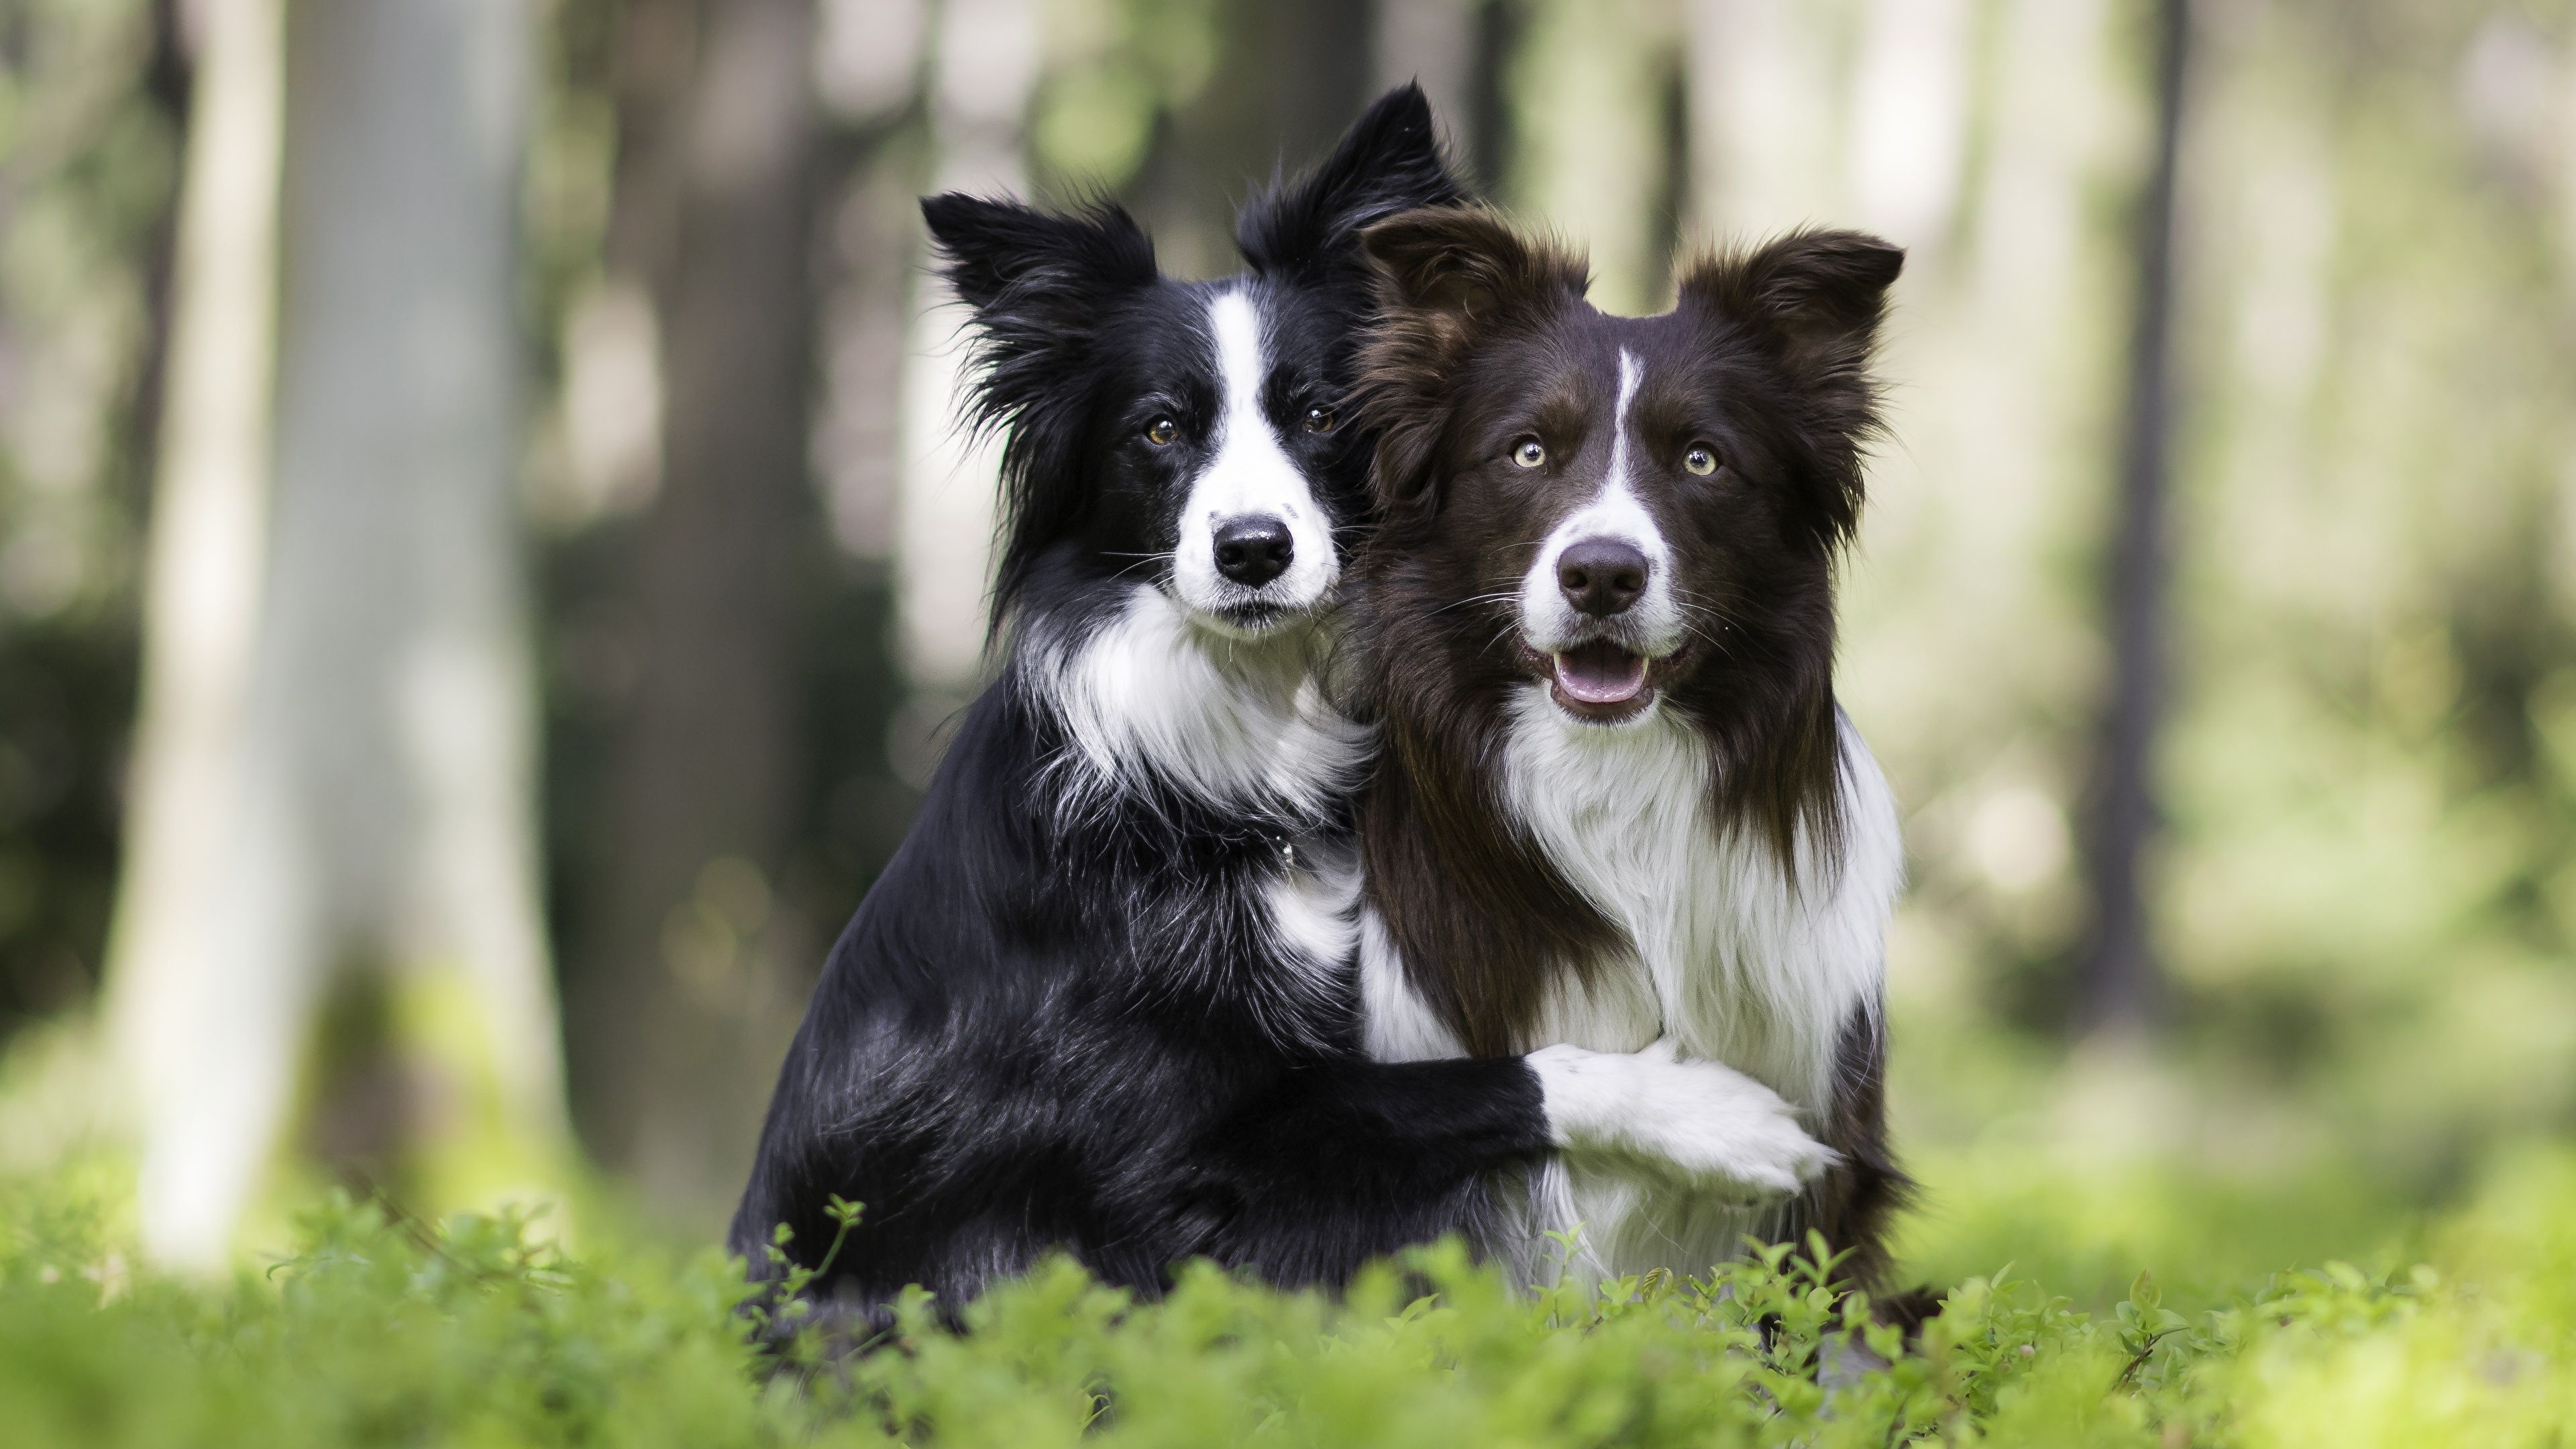 Collie wallpapers, Canine beauty, Border Collie charm, Stunning HD visuals, 3840x2160 4K Desktop